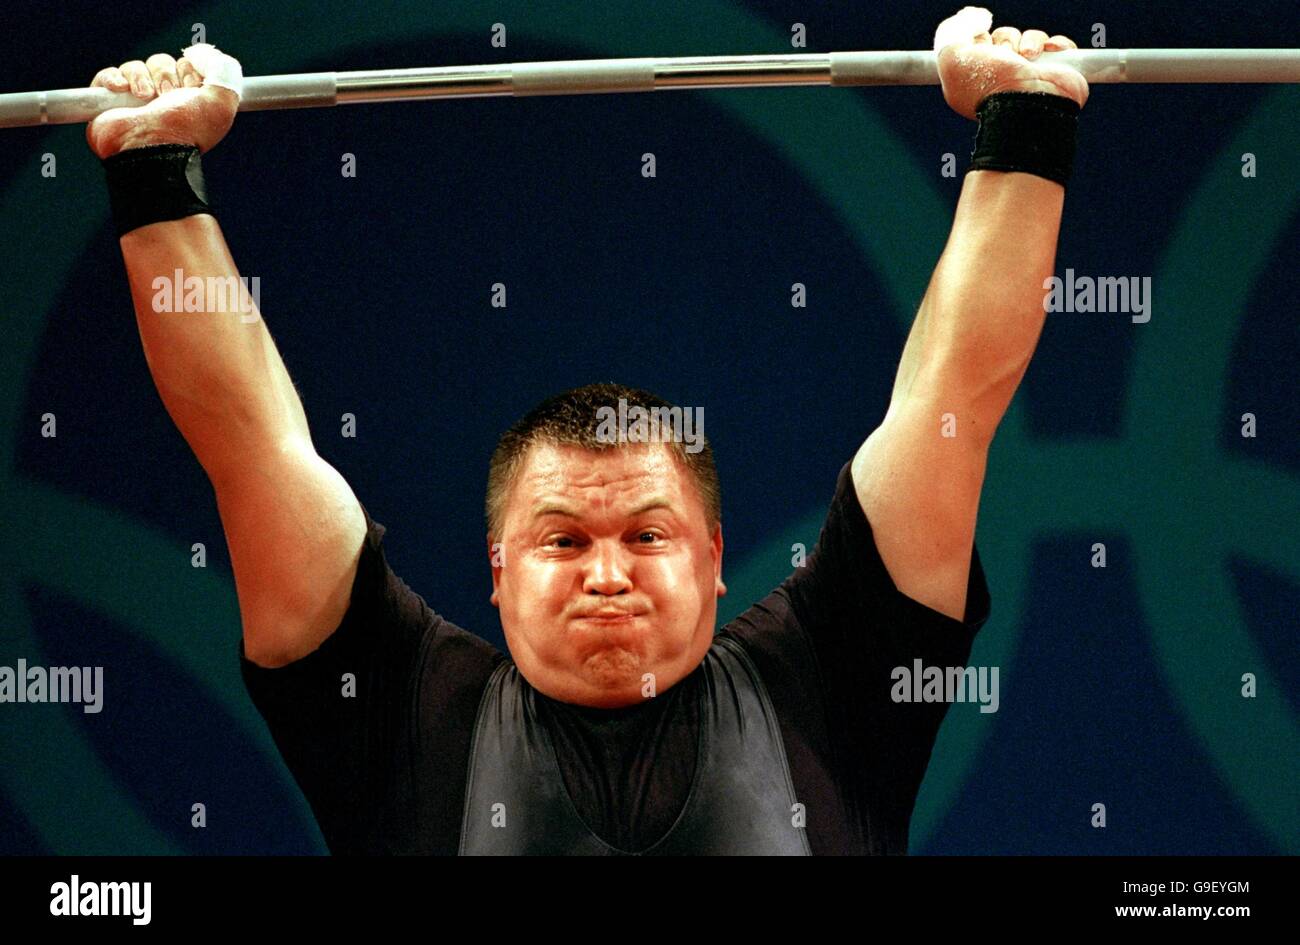 Sydney 2000 Olympic Games - Weightlifting - Men's +105kg. Latvia's Viktors Scerbatihs locks his arms to secure the lift Stock Photo